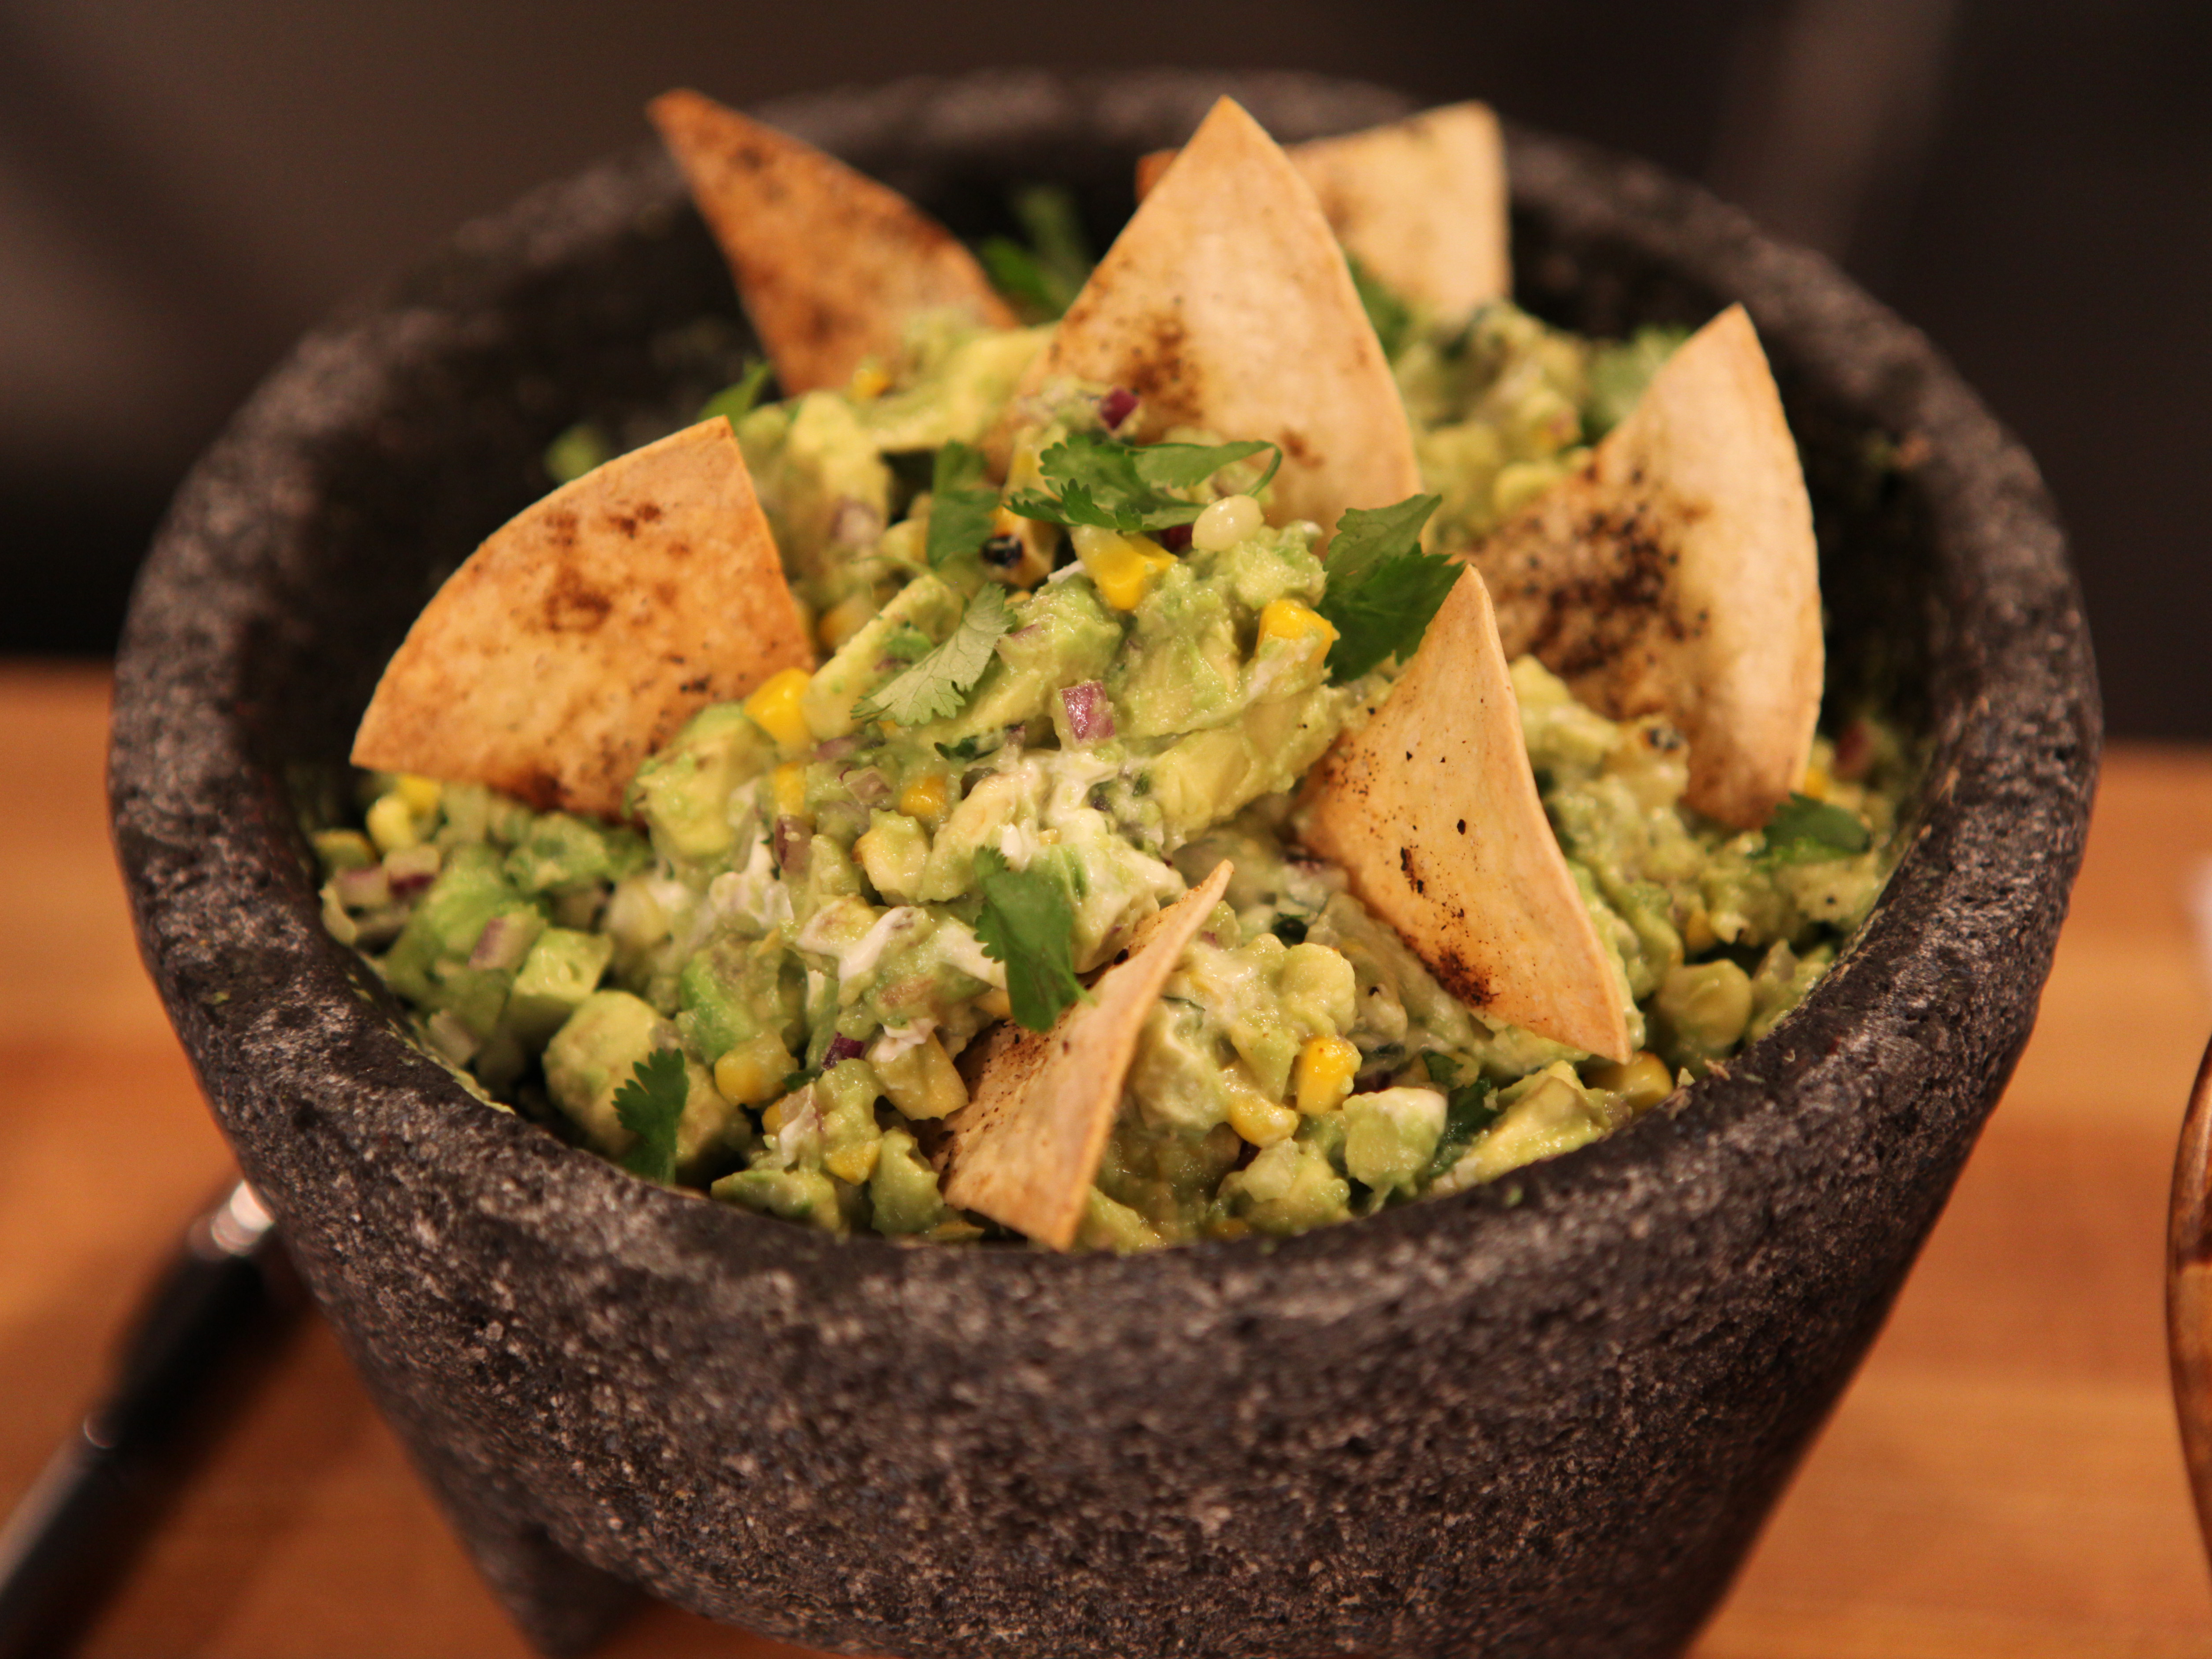 Bowl of guacamole on Mexican comal decorated with tortilla chips